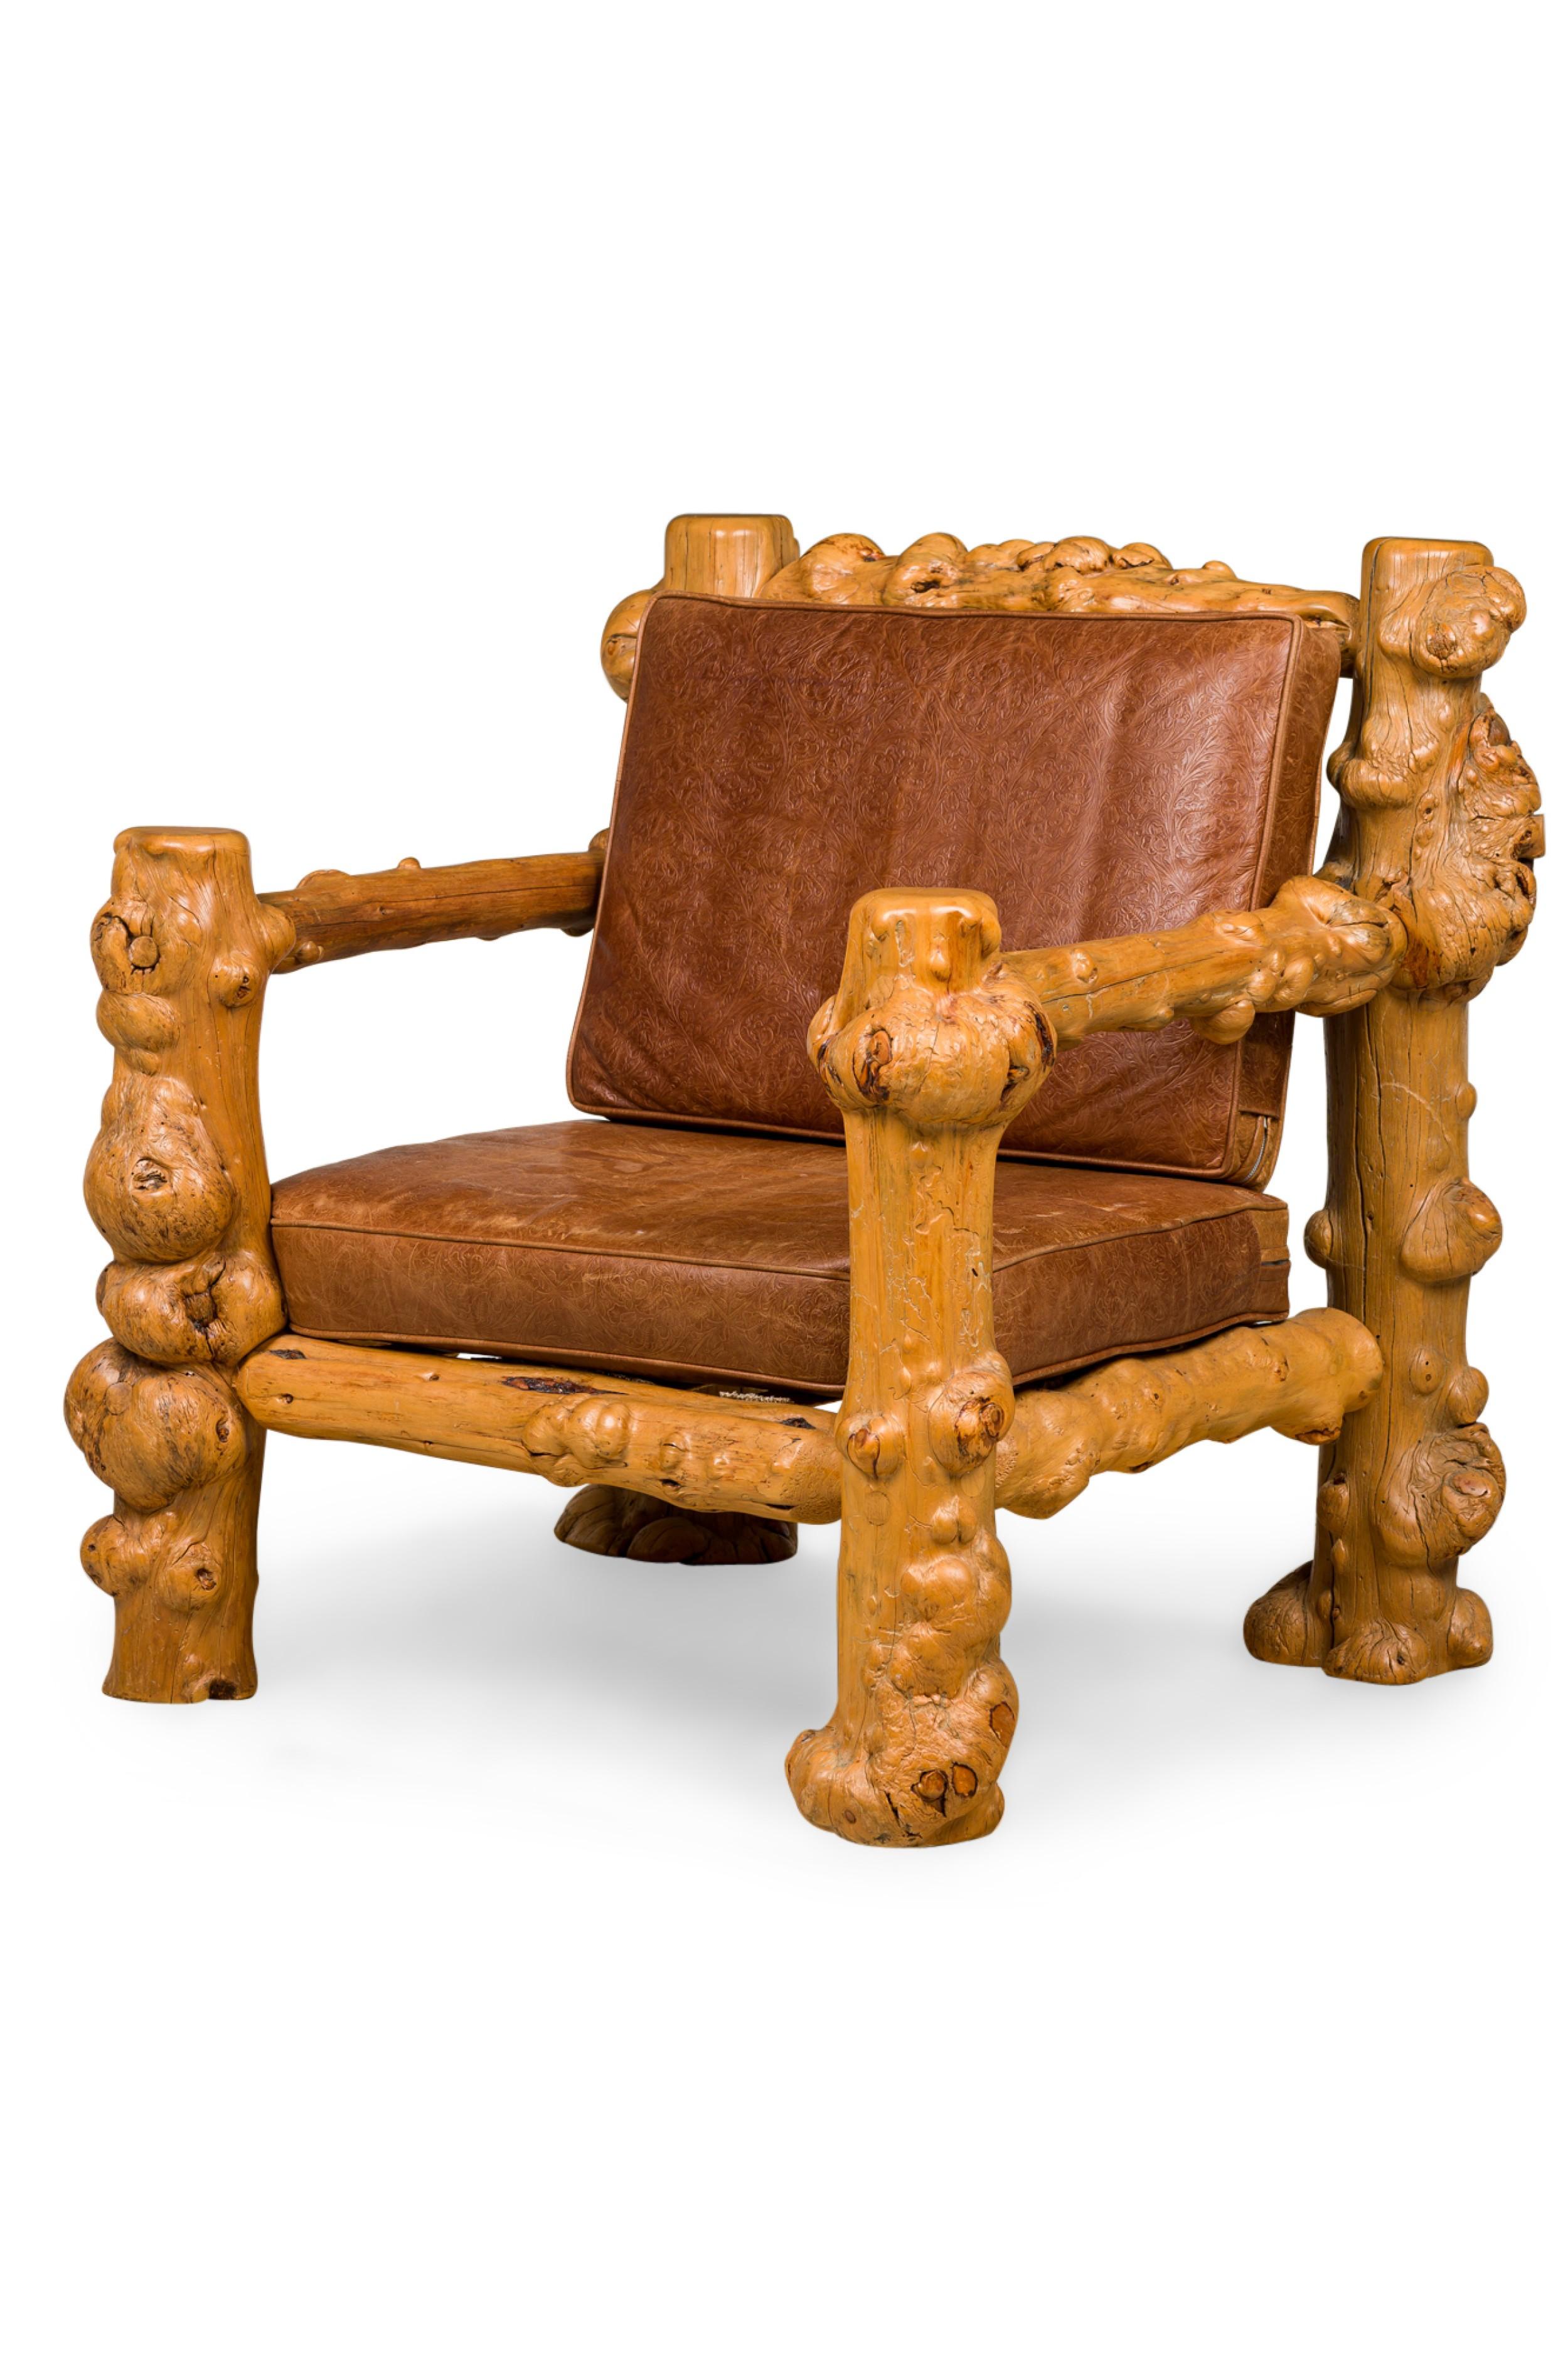 American Rustic Blond Root Wood and Embossed Leather Throne Armchair For Sale